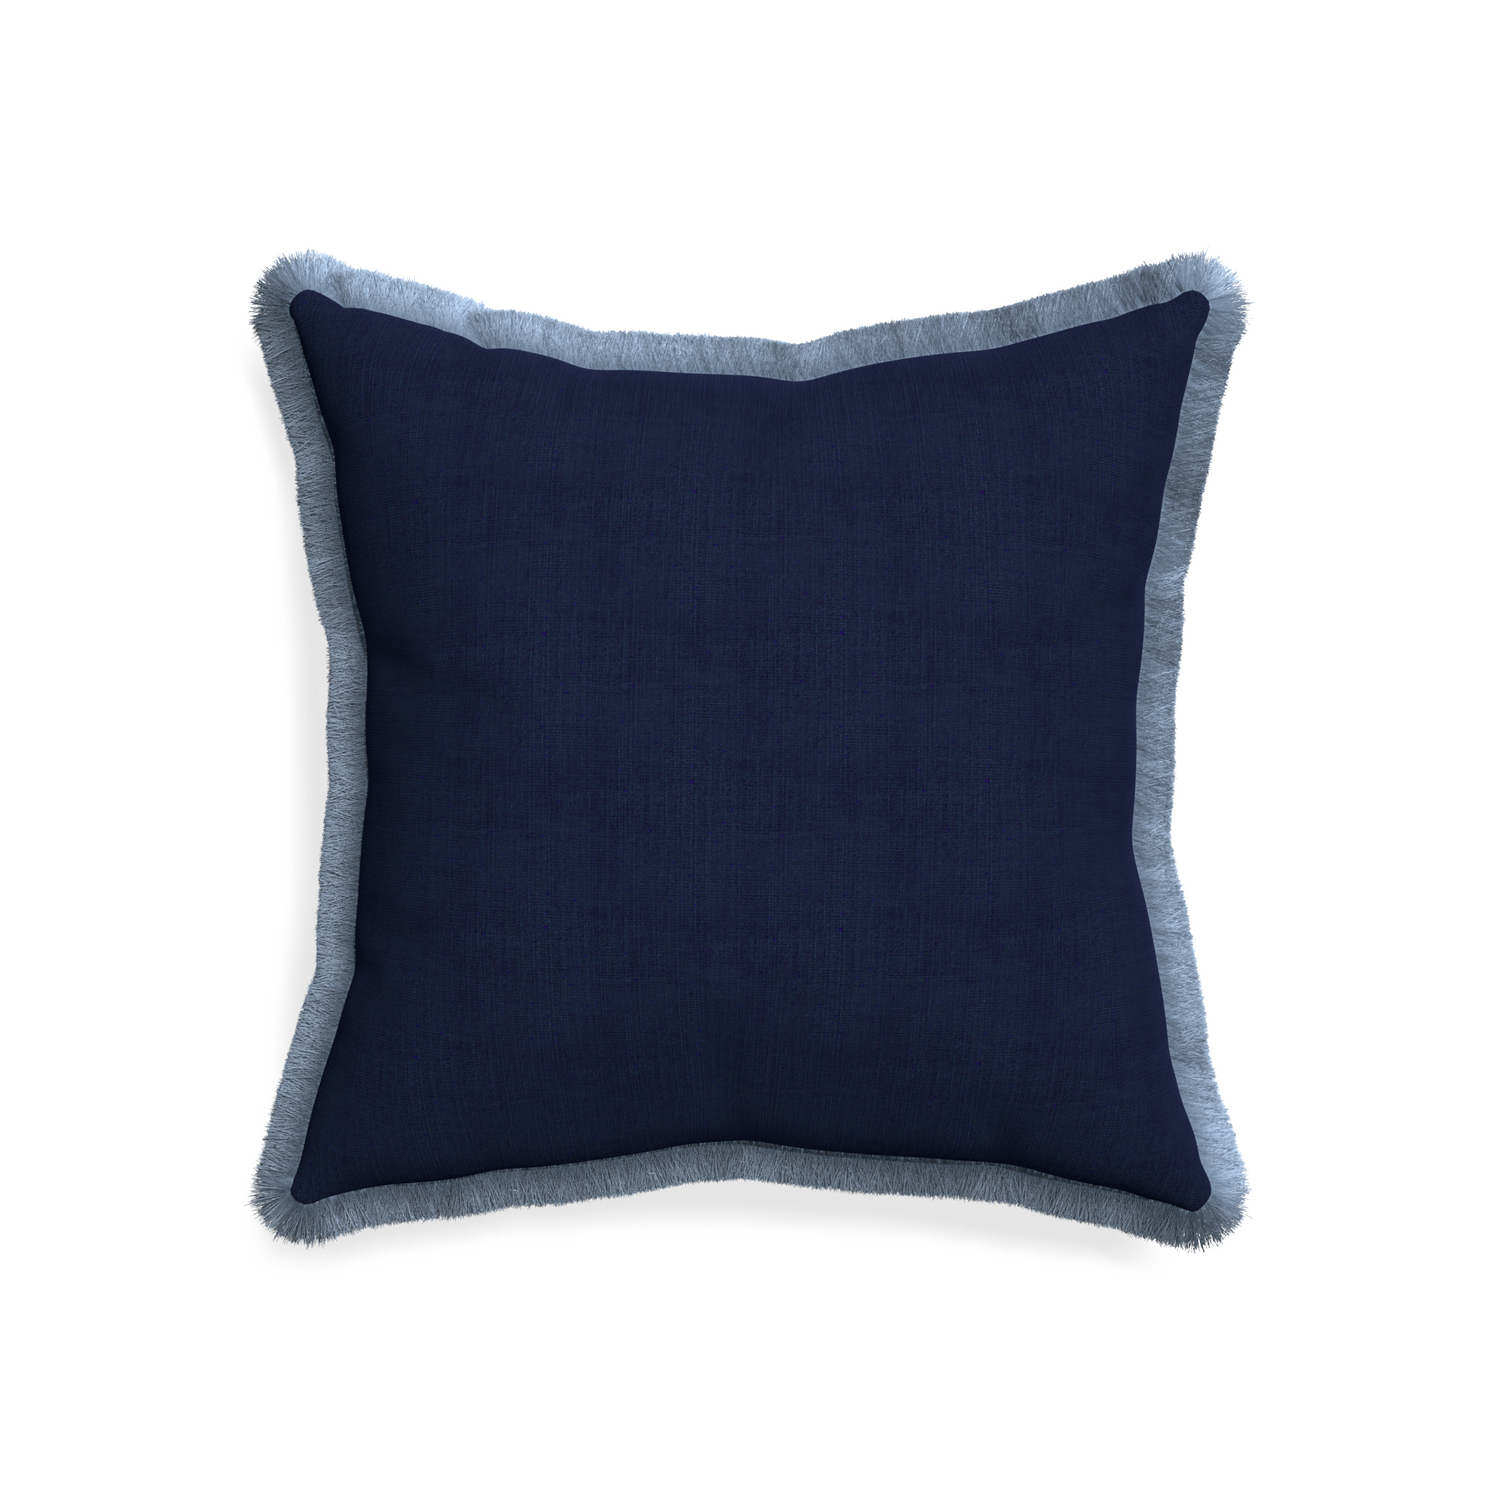 20-square midnight custom pillow with sky fringe on white background